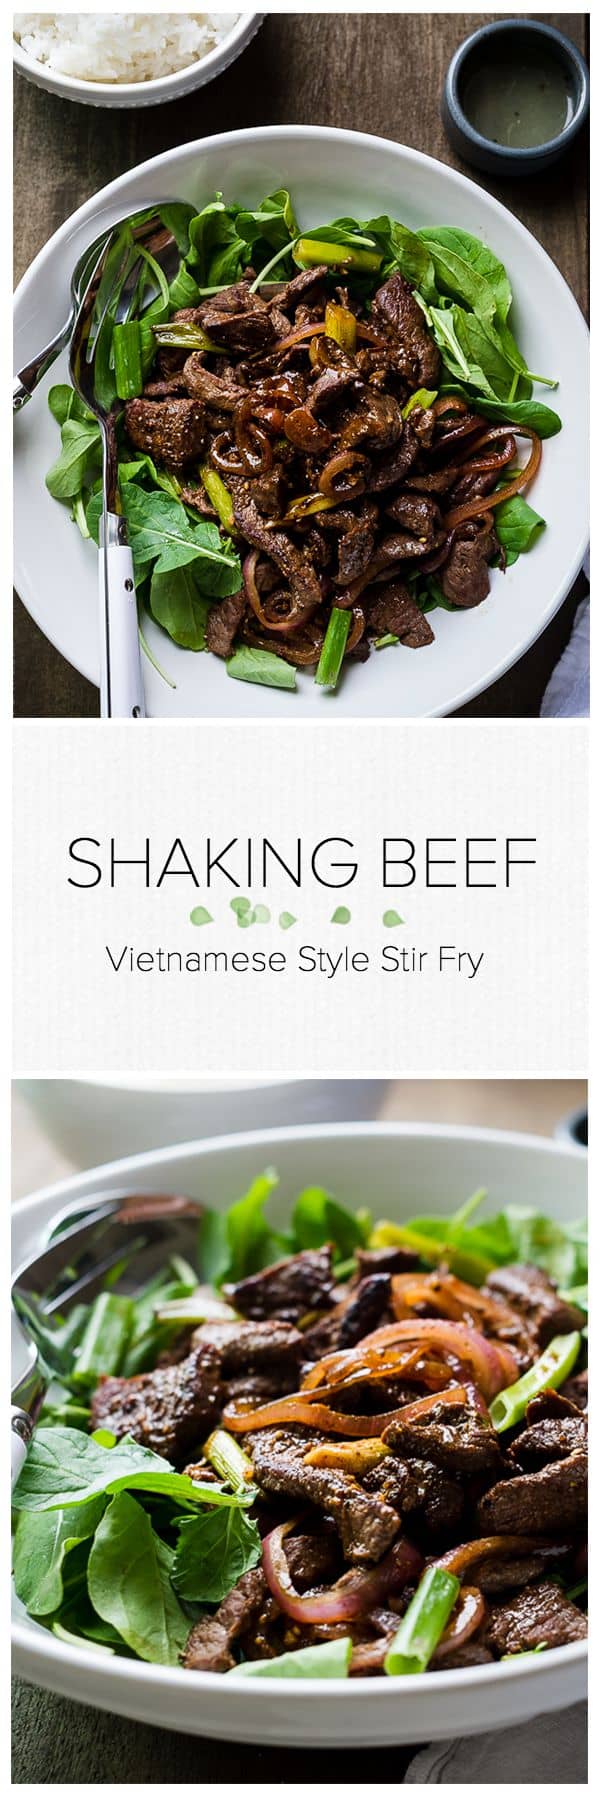 Shaking Beef | www.kitchenconfidante.com | This tasty Vietnamese style stir-fry is simple and perfect for busy weeknight meals.